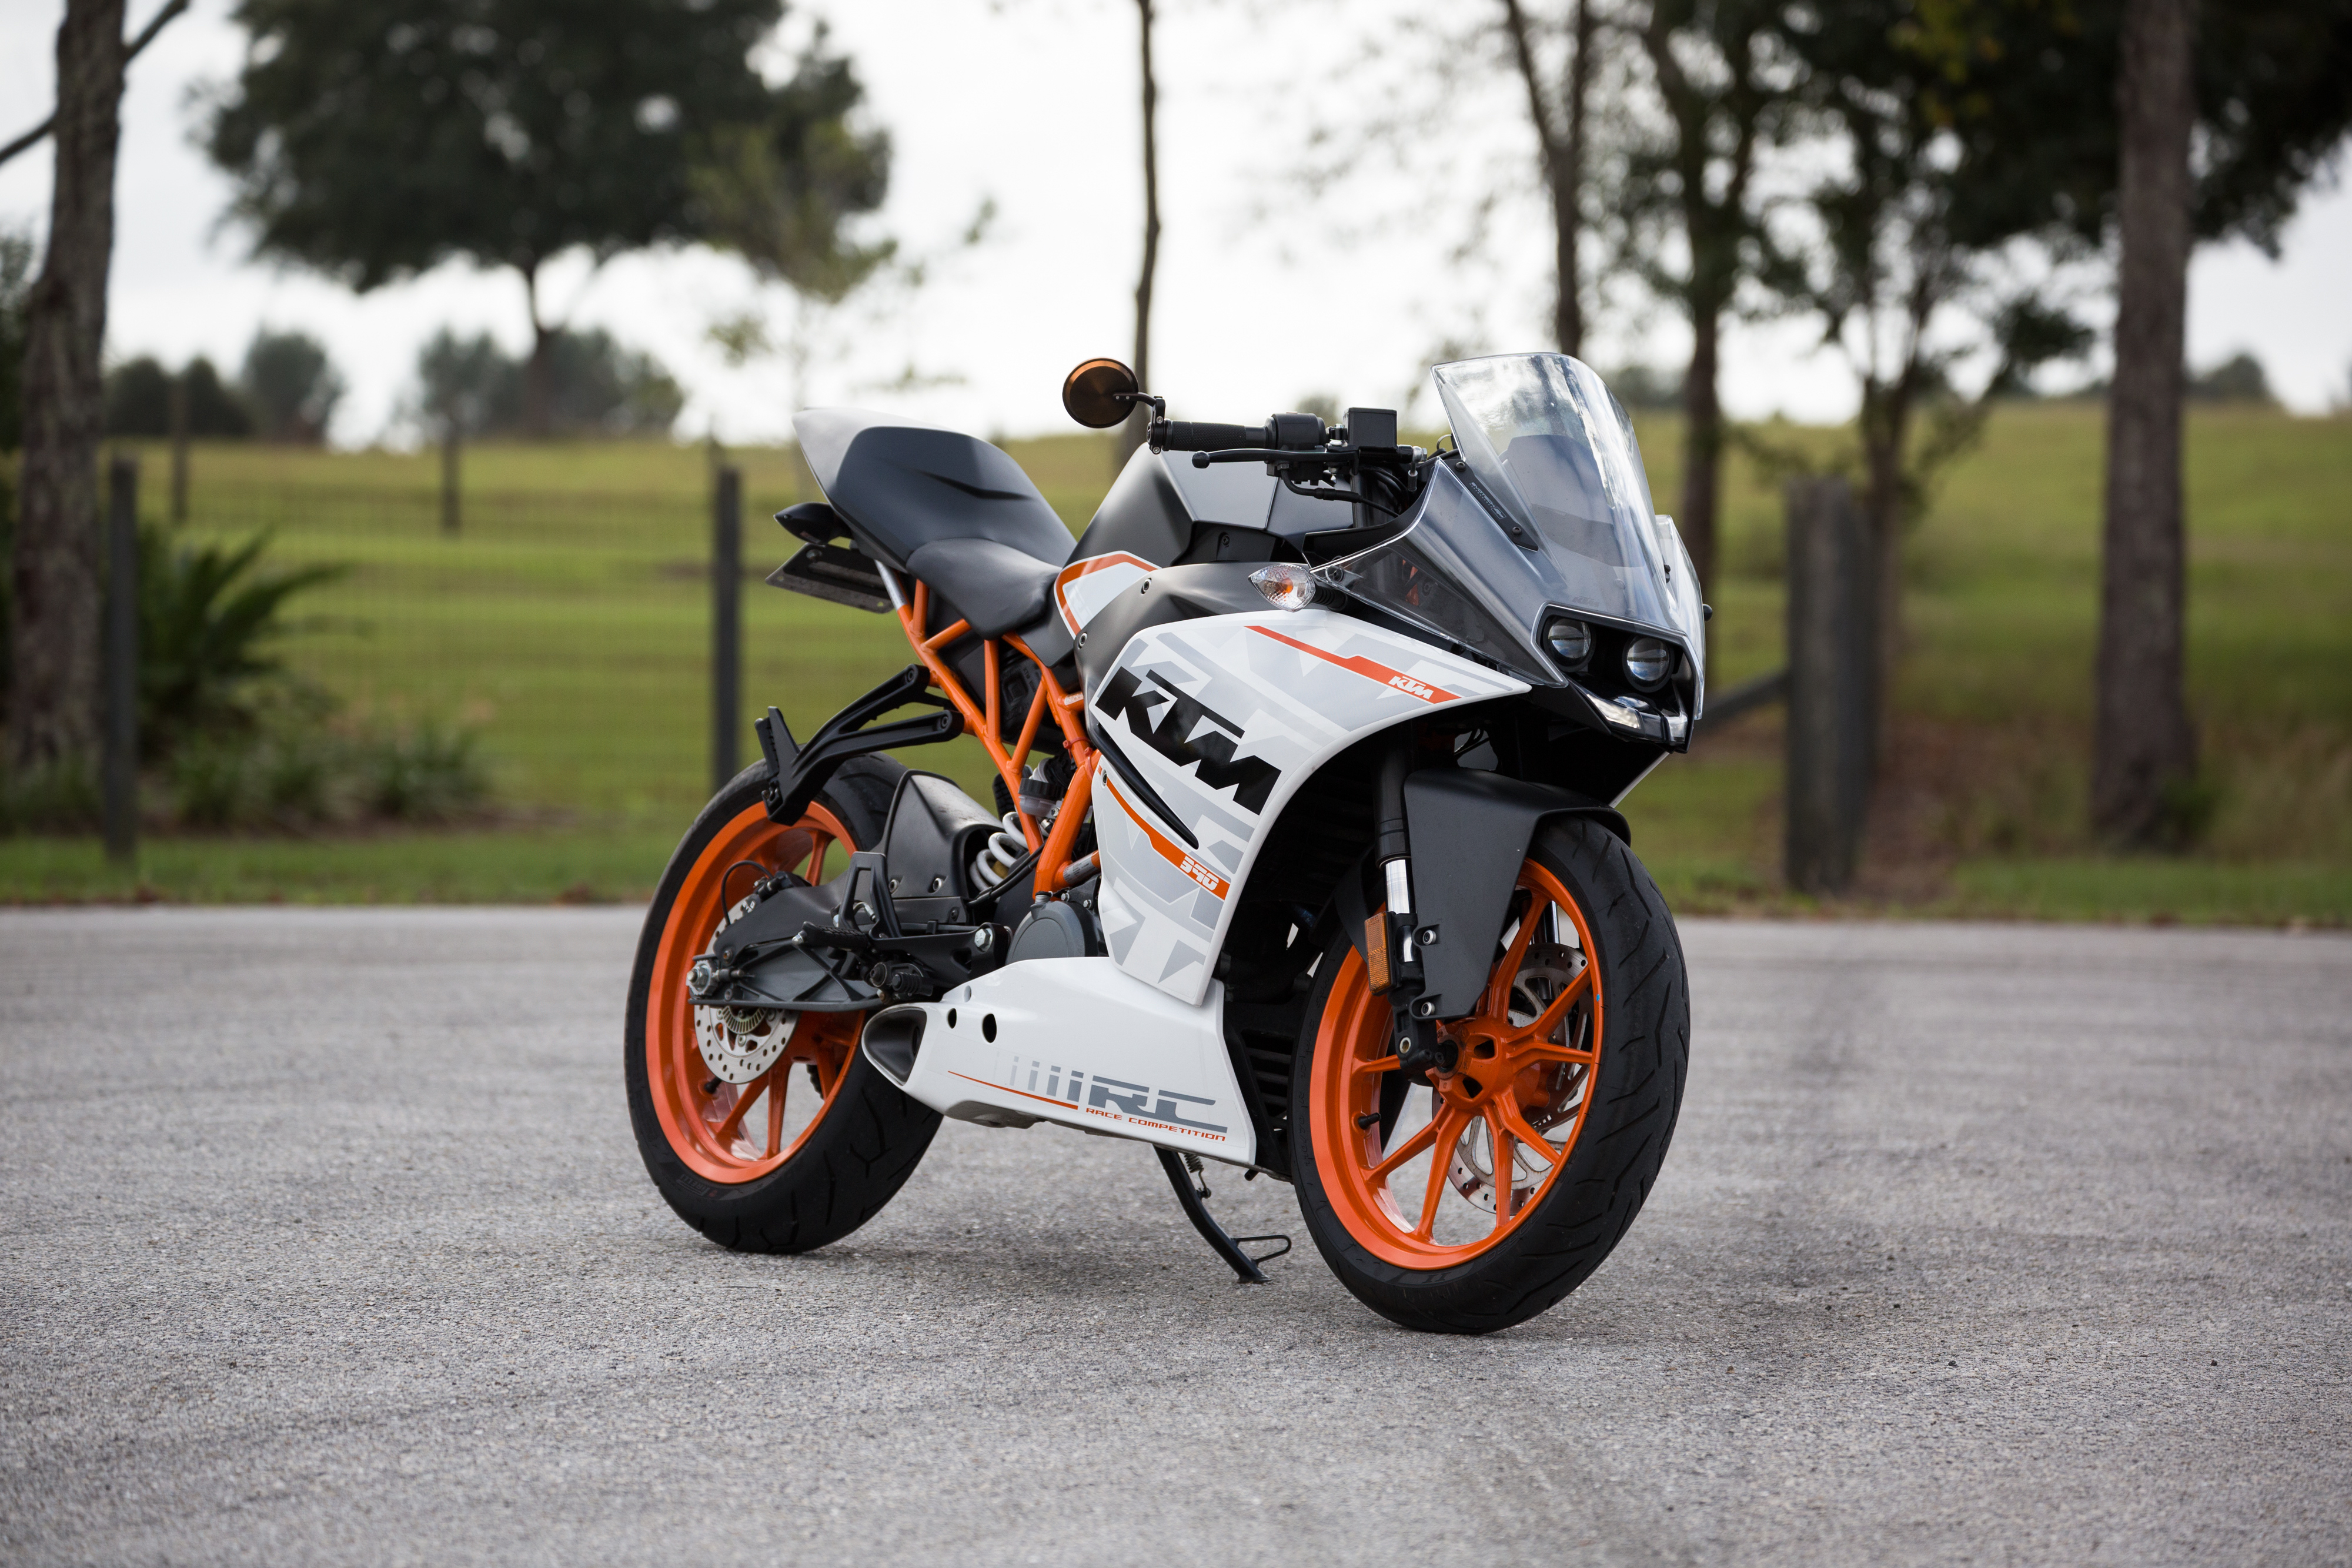 motorcycles, ktm, motorcycle, side view